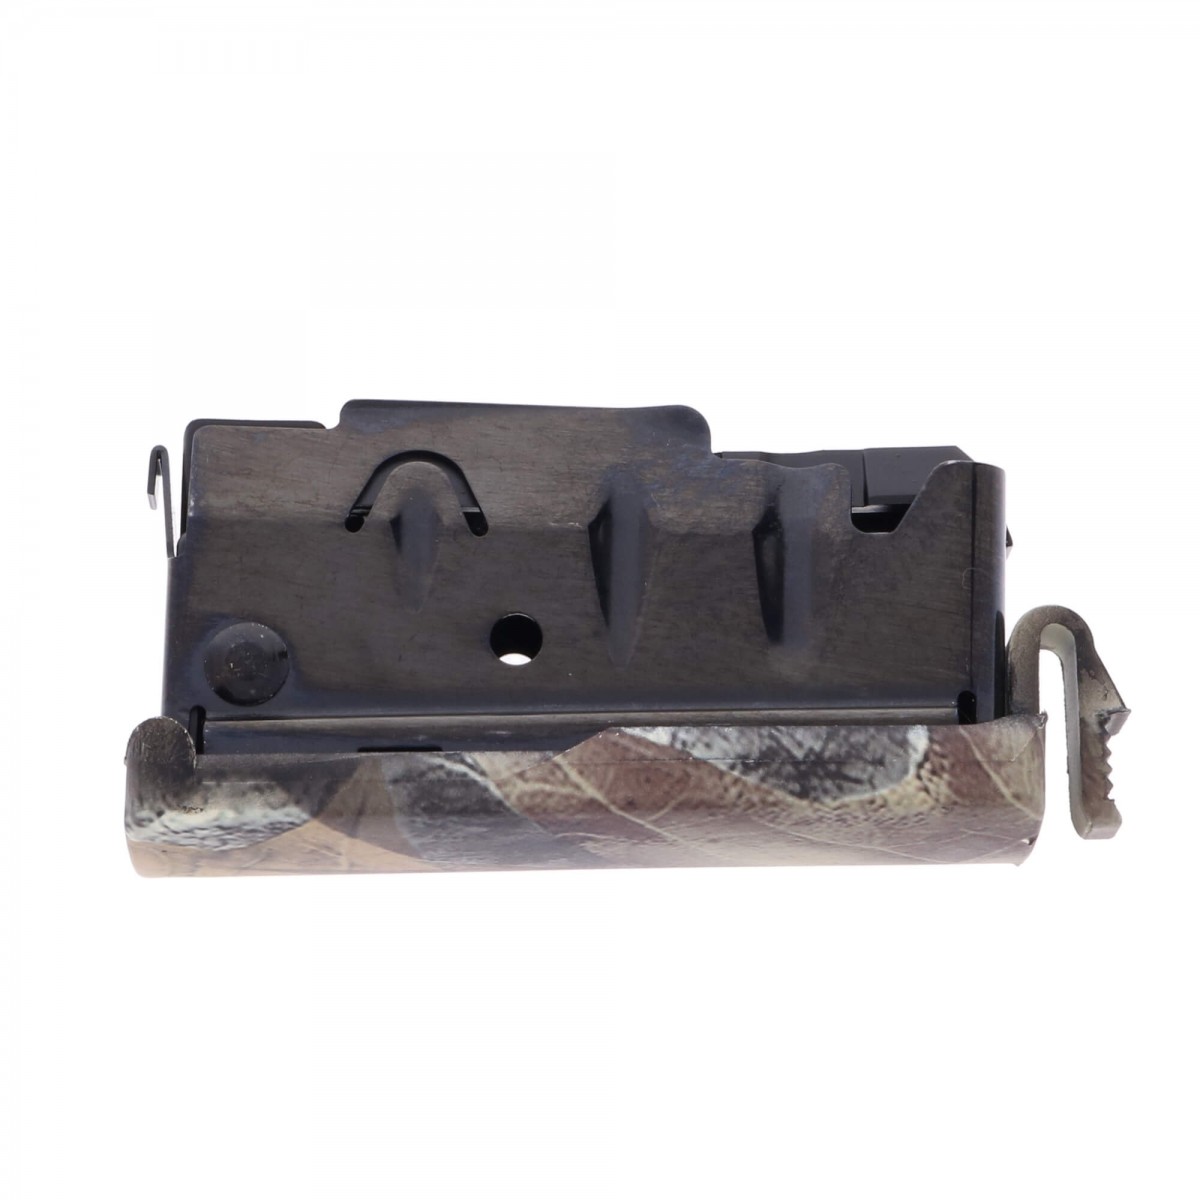 Savage Arms fits Axis Camo Compact in .223 4-Round Magazine 55225